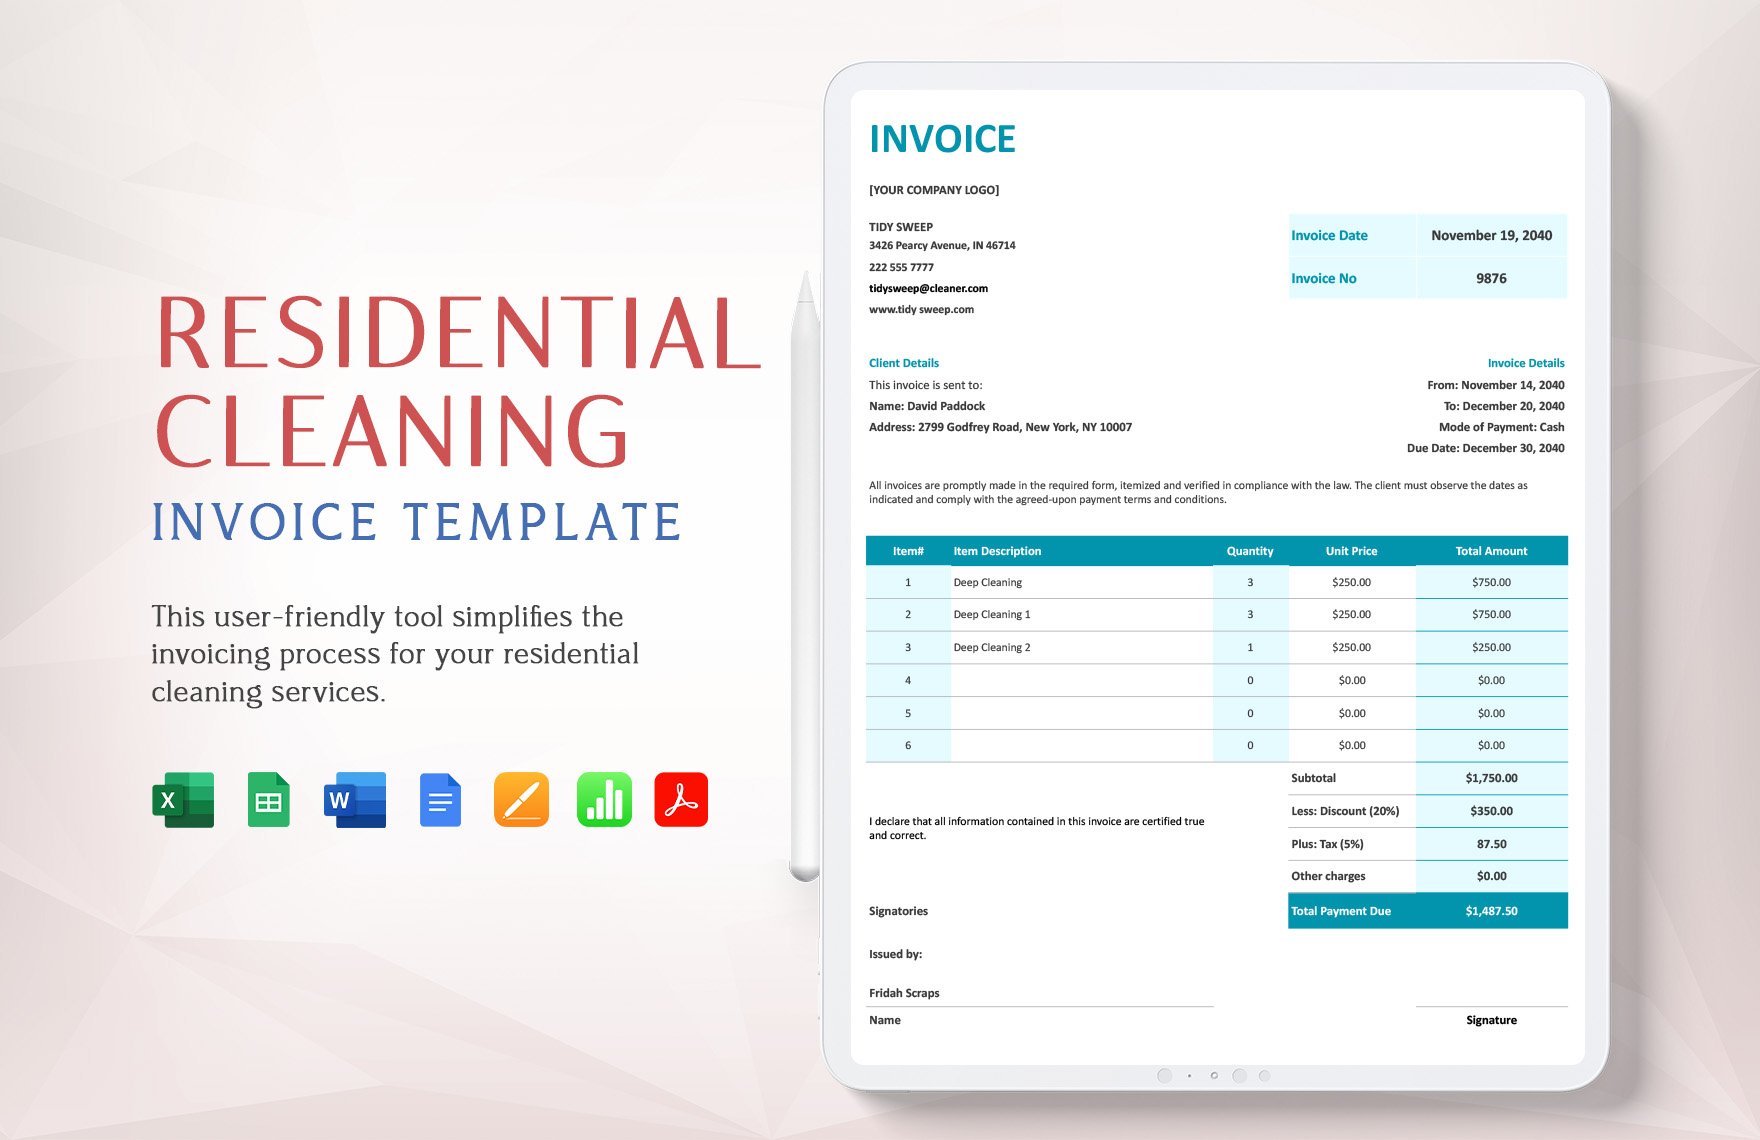 Residential Cleaning Invoice Template in Word, Google Docs, Excel, Google Sheets, Apple Pages, Apple Numbers